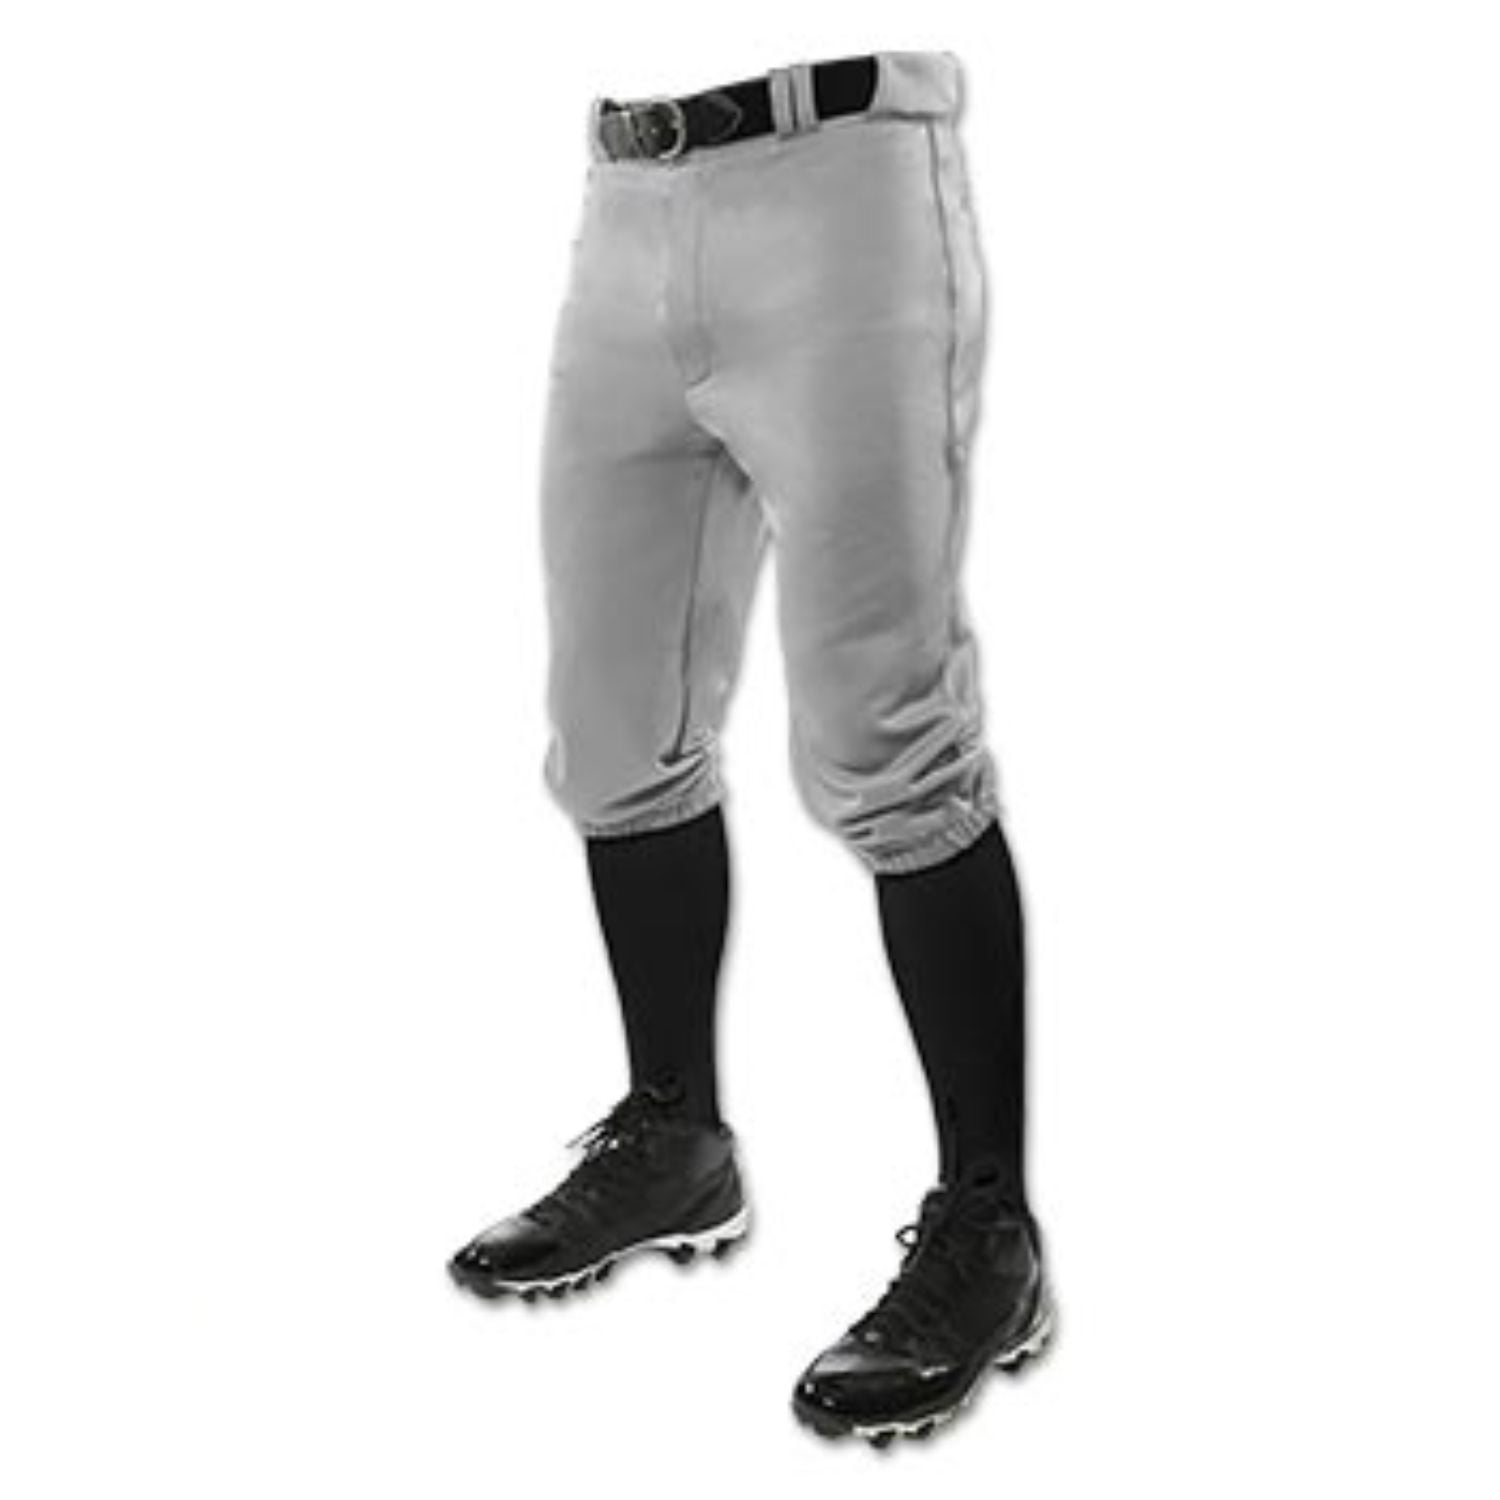 Details about   Alleson Adult Baseball Pants Medium New Gray W/ Black Strip 